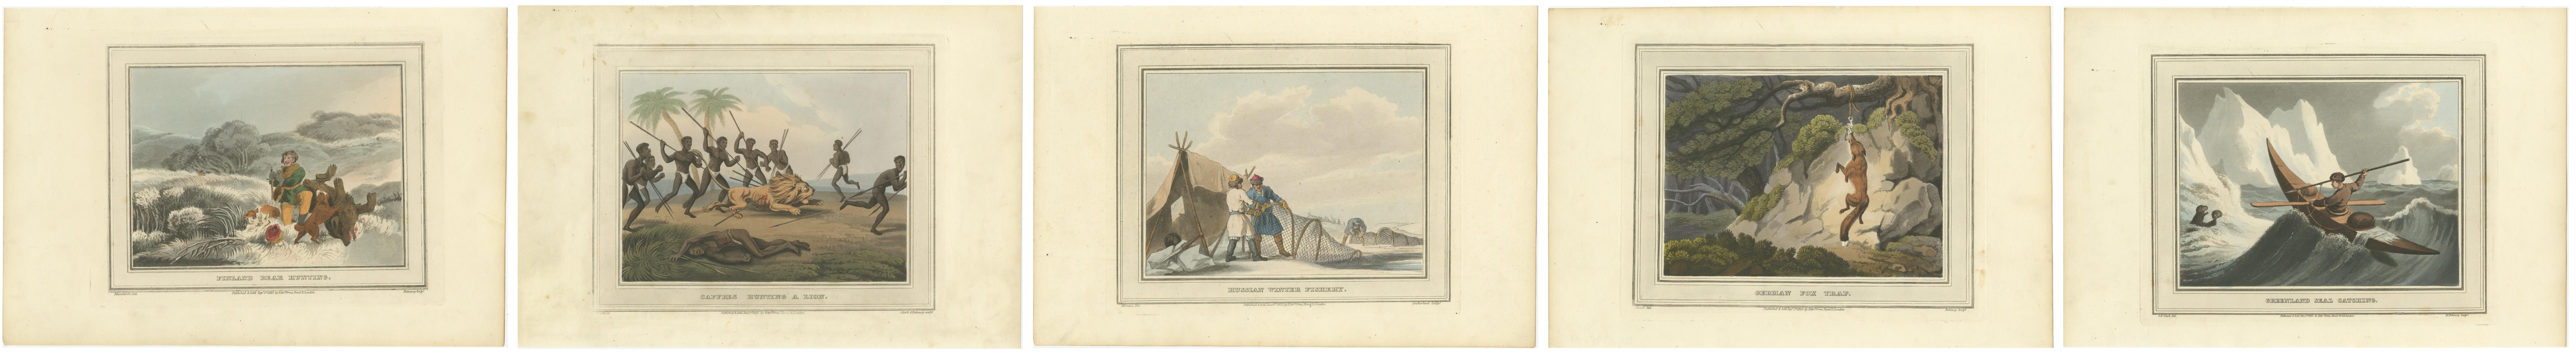 Engraved Hunting and Gathering Across Continents in a Collage of Five Engravings, 1813 For Sale